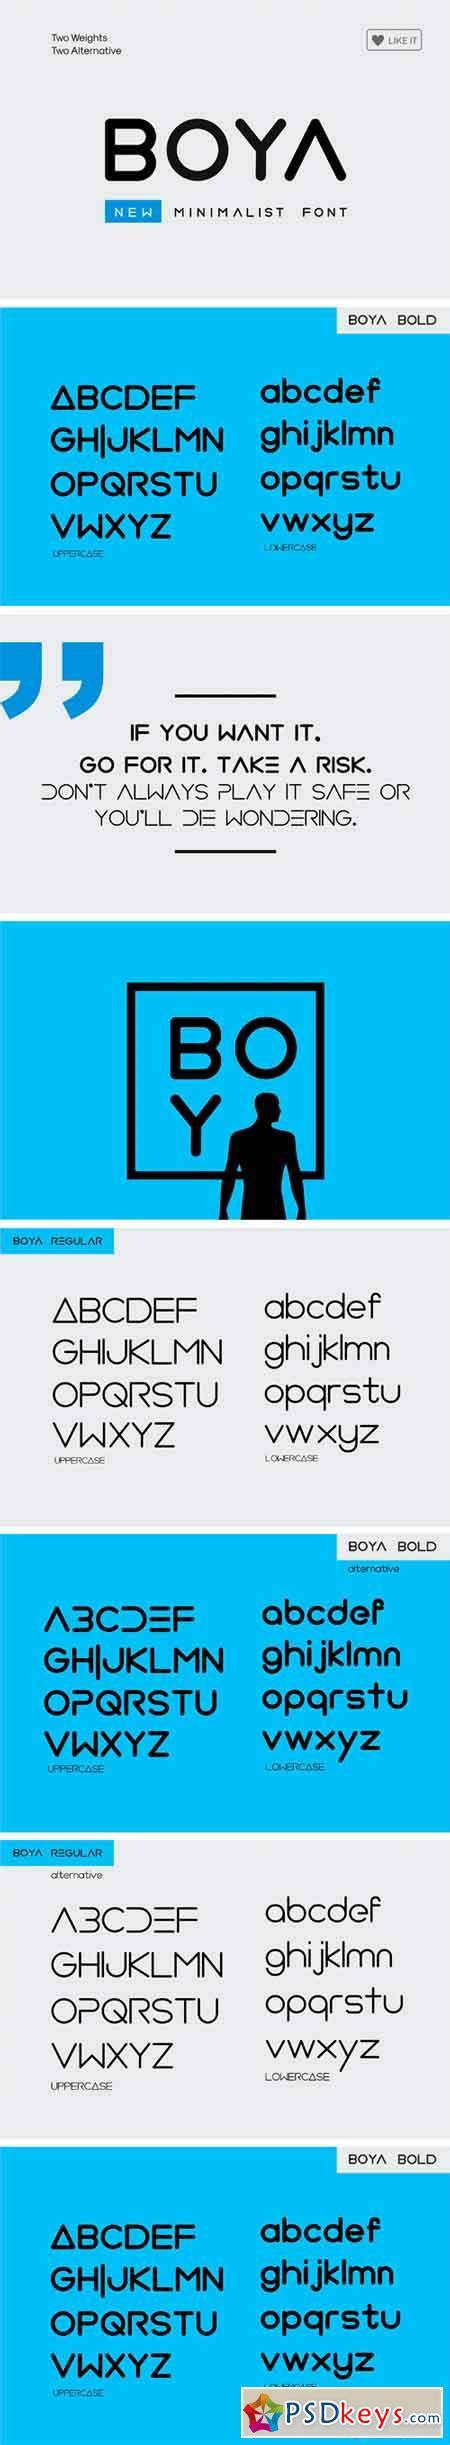 Boya Rounded Font 2316709 Free Download Photoshop Vector Stock